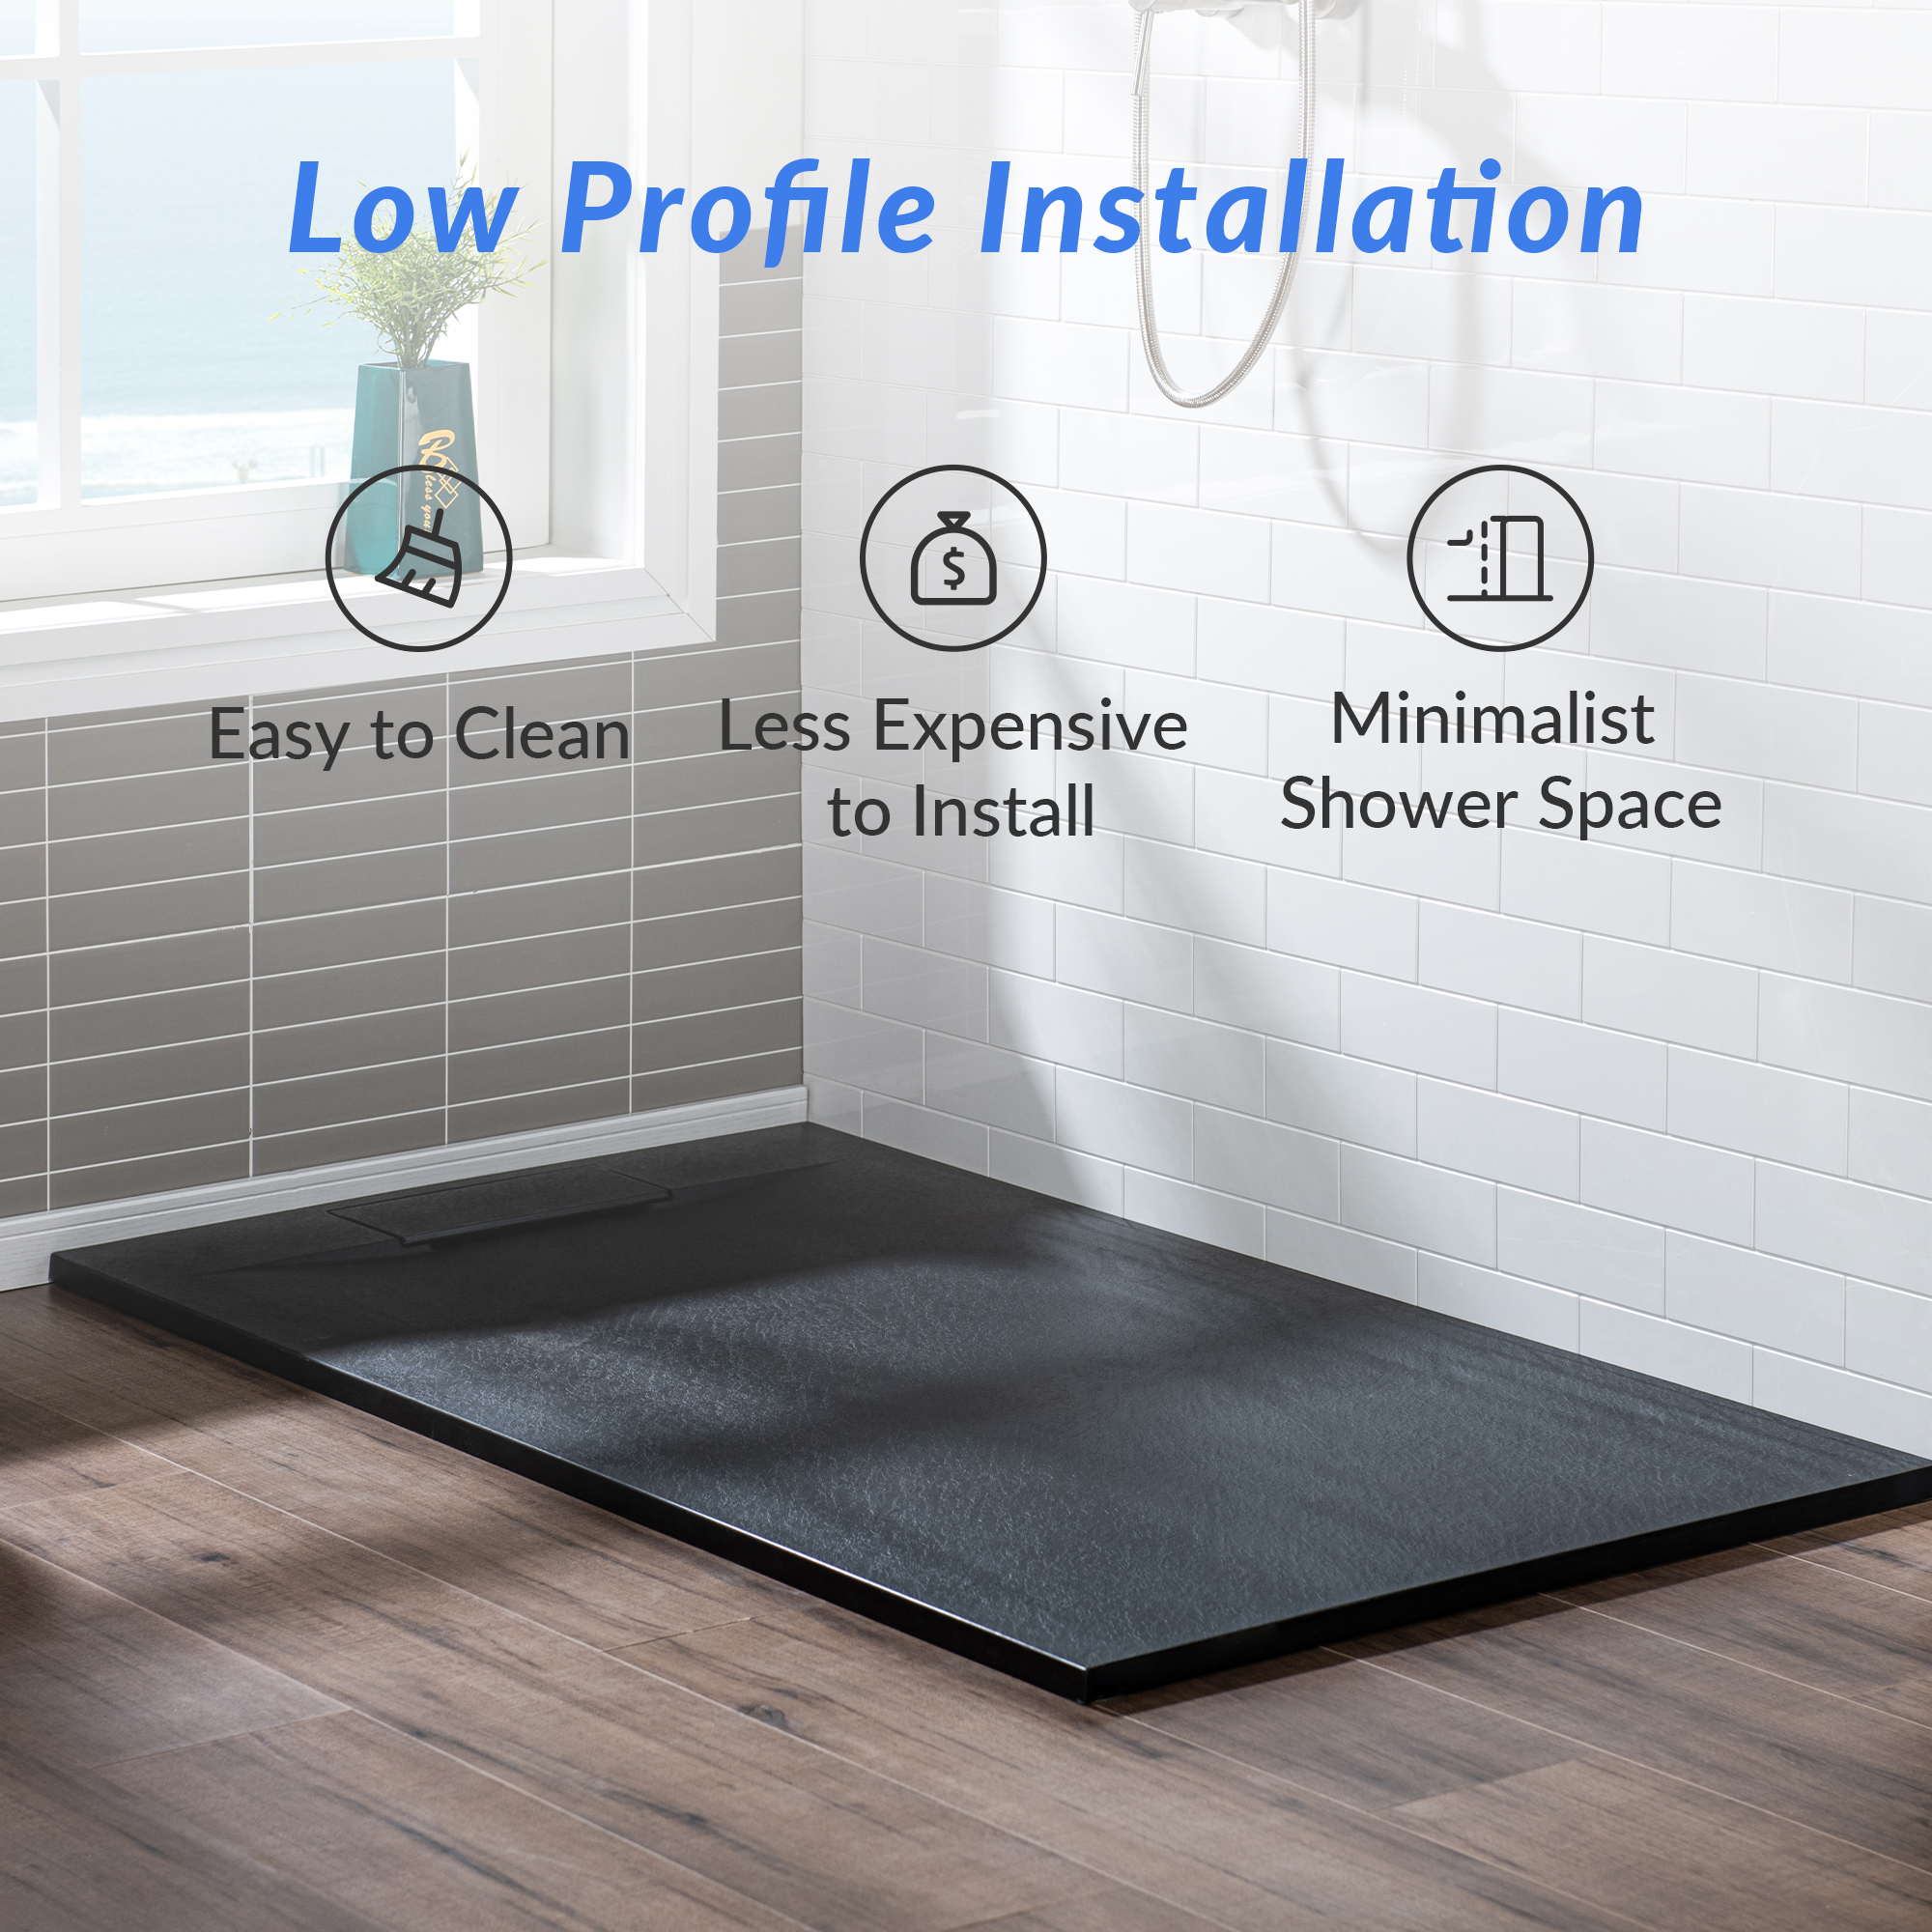  WOODBRIDGE 48-in L x 36-in W Zero Threshold End Drain Shower Base with Reversable Drain Placement, Matching Decorative Drain Plate and Tile Flange, Wheel Chair Access, Low Profile, Black_12416